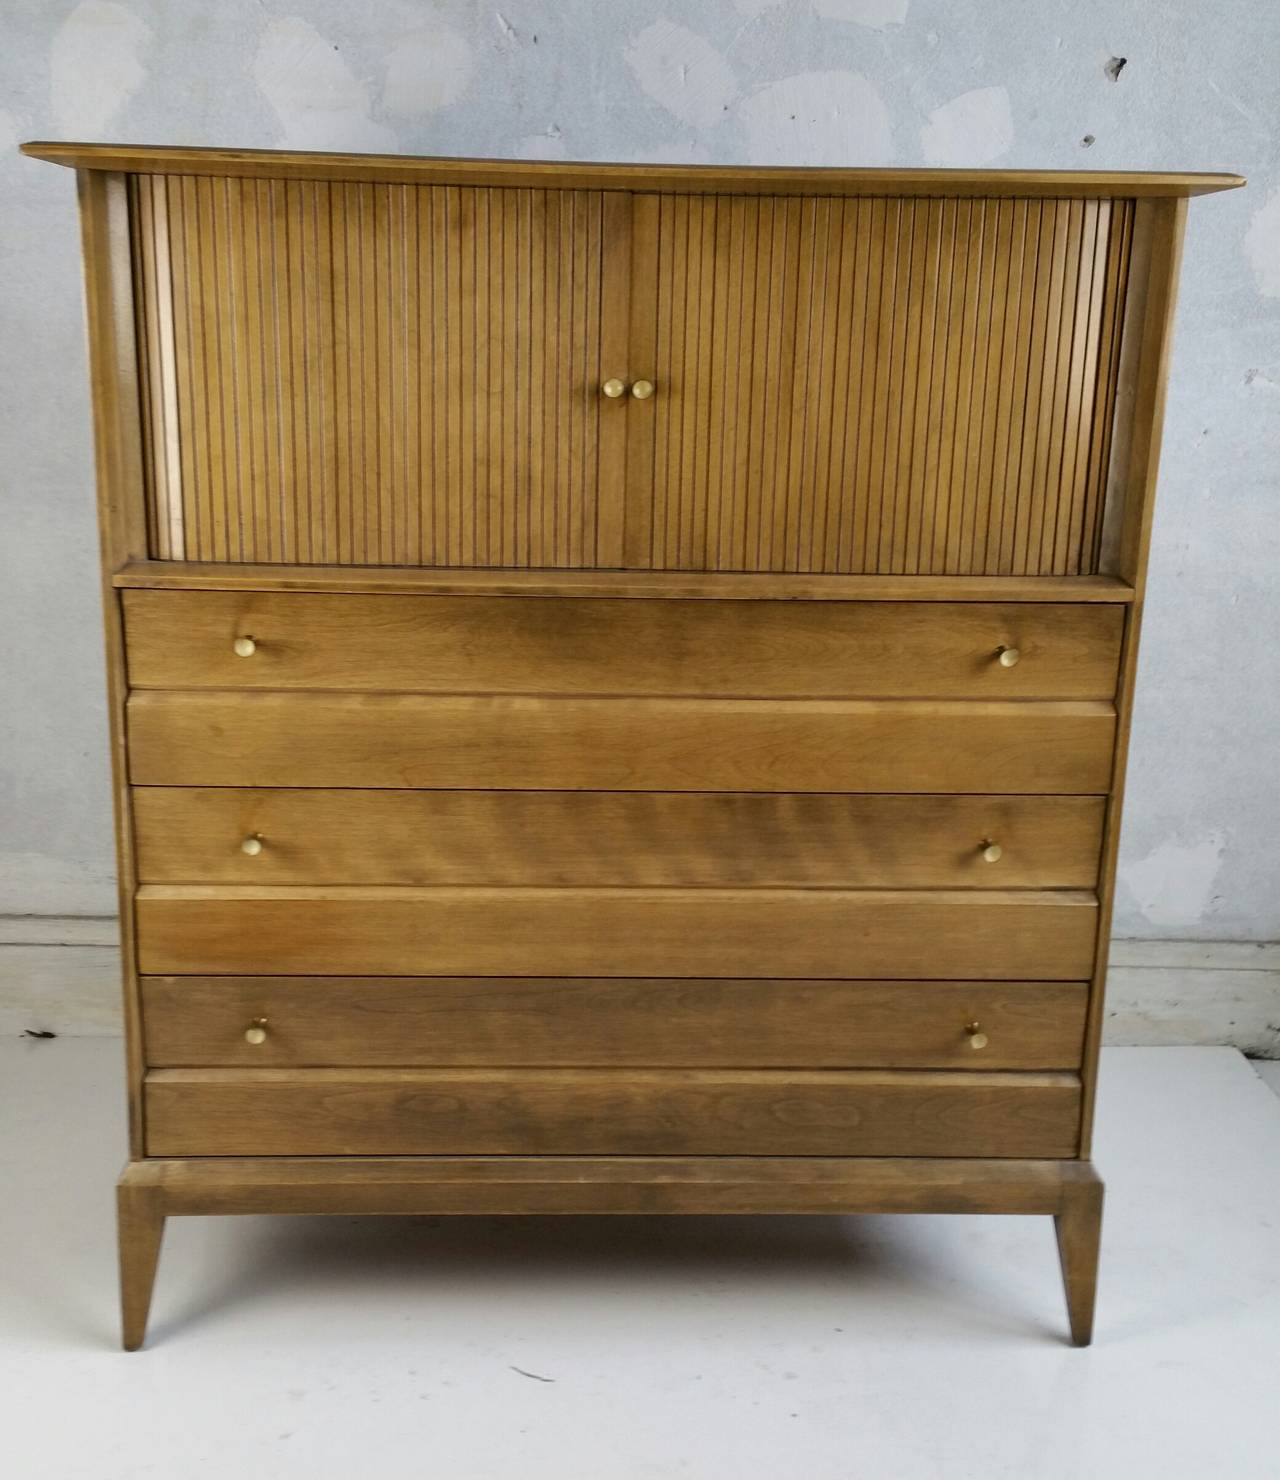 Handsome Tambor Door Chest, Solid Birch.. Quality construction.Modernist brass and enamel pulls,,Slightly curved and beveled top,, Very unusual design,Produced for only one year in limited number for Heywood Wakefield